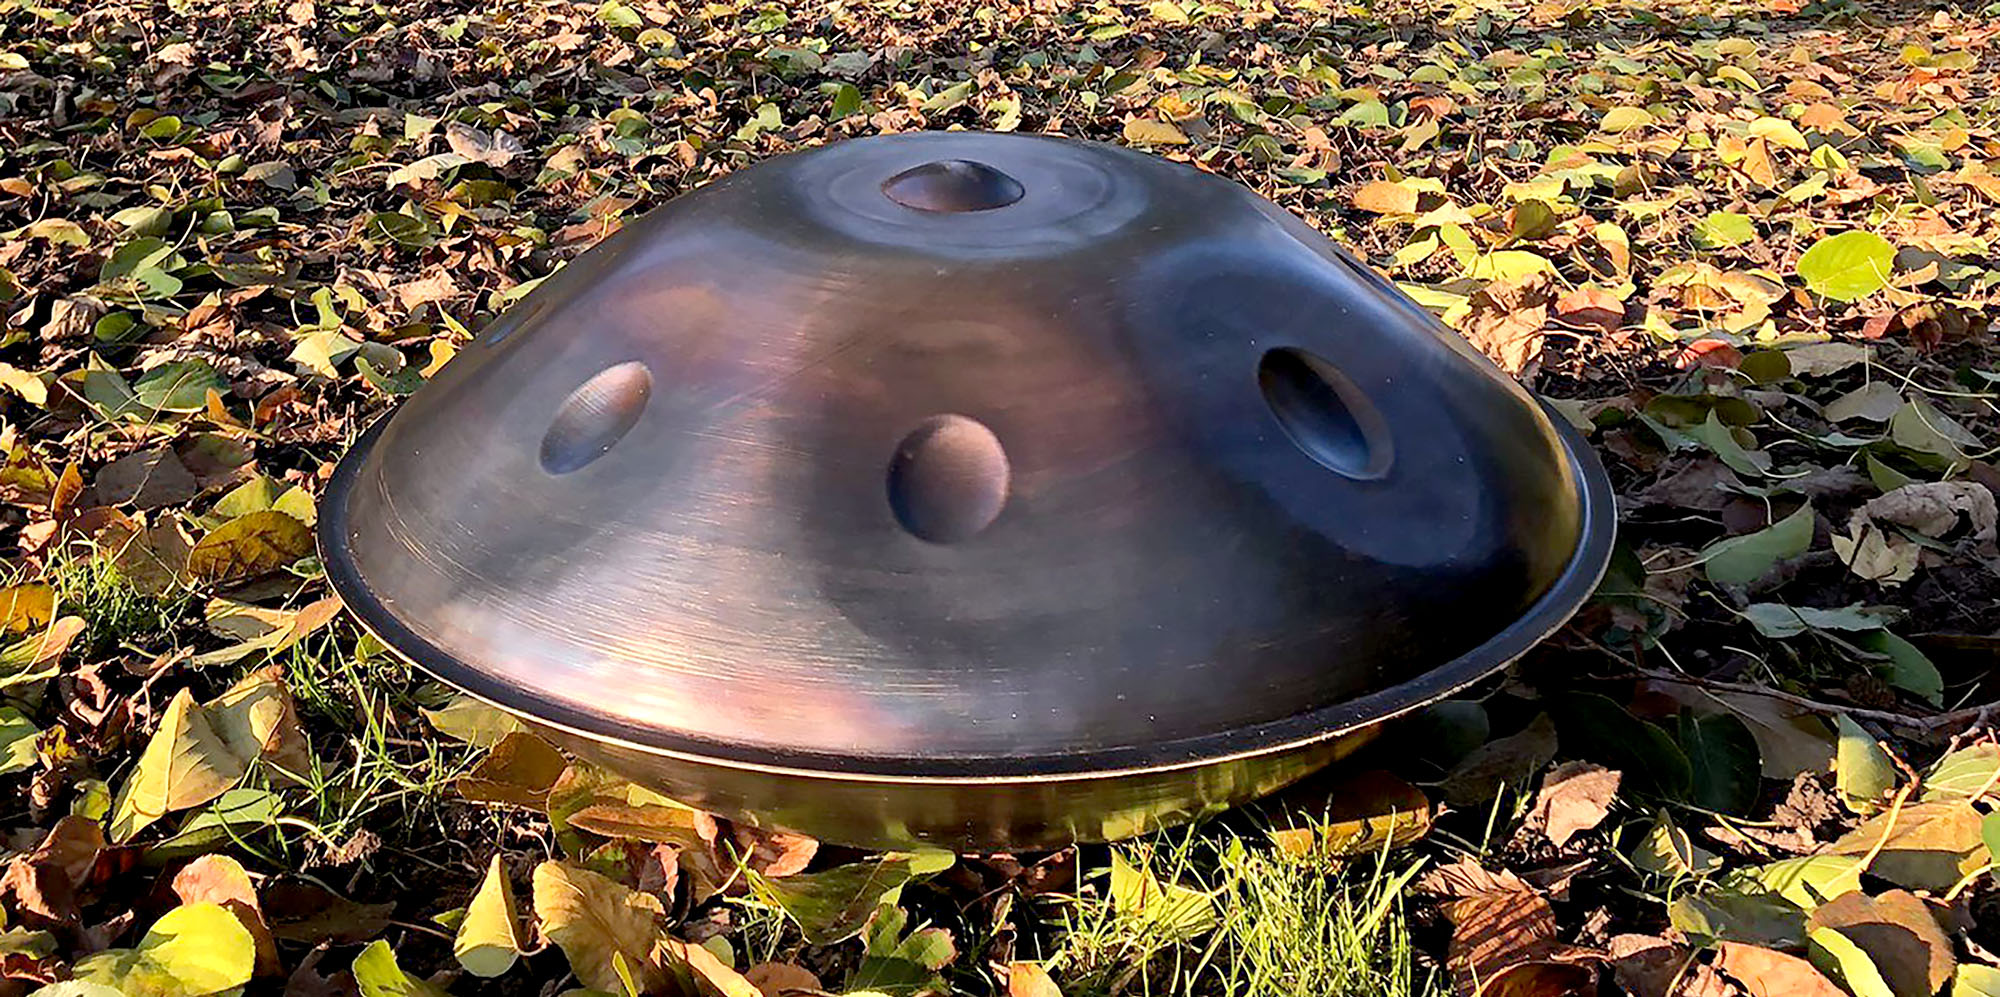 Learning To Play A Handpan / Hang Drum - Node Handpans